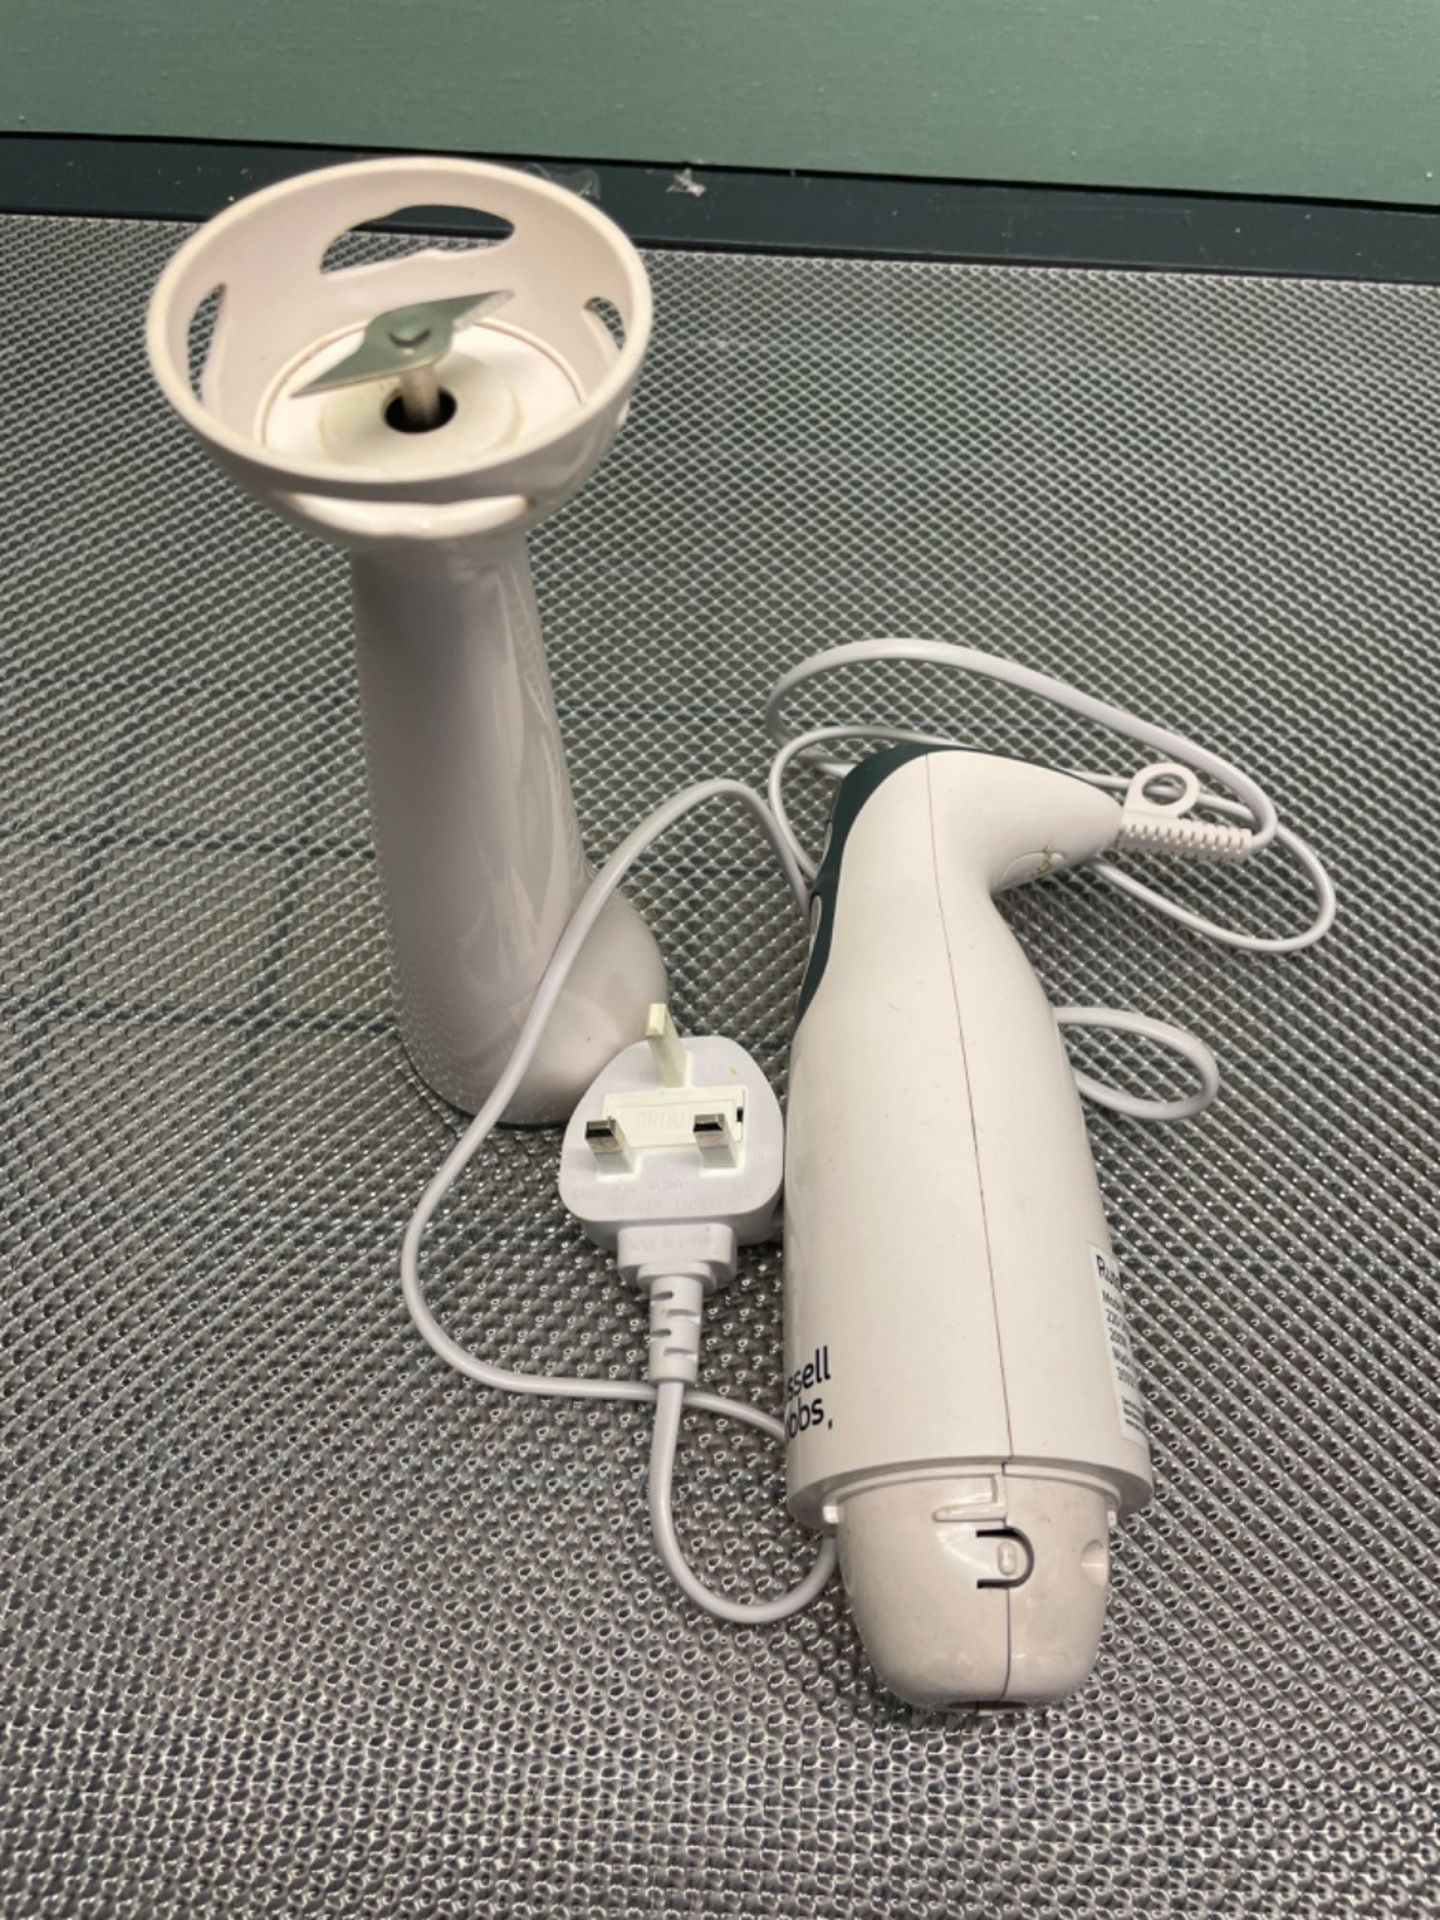 Russell Hobbs Food Collection Electric Hand Blender, 2 Speeds and Pulse Technology, Detachable blen - Image 2 of 3